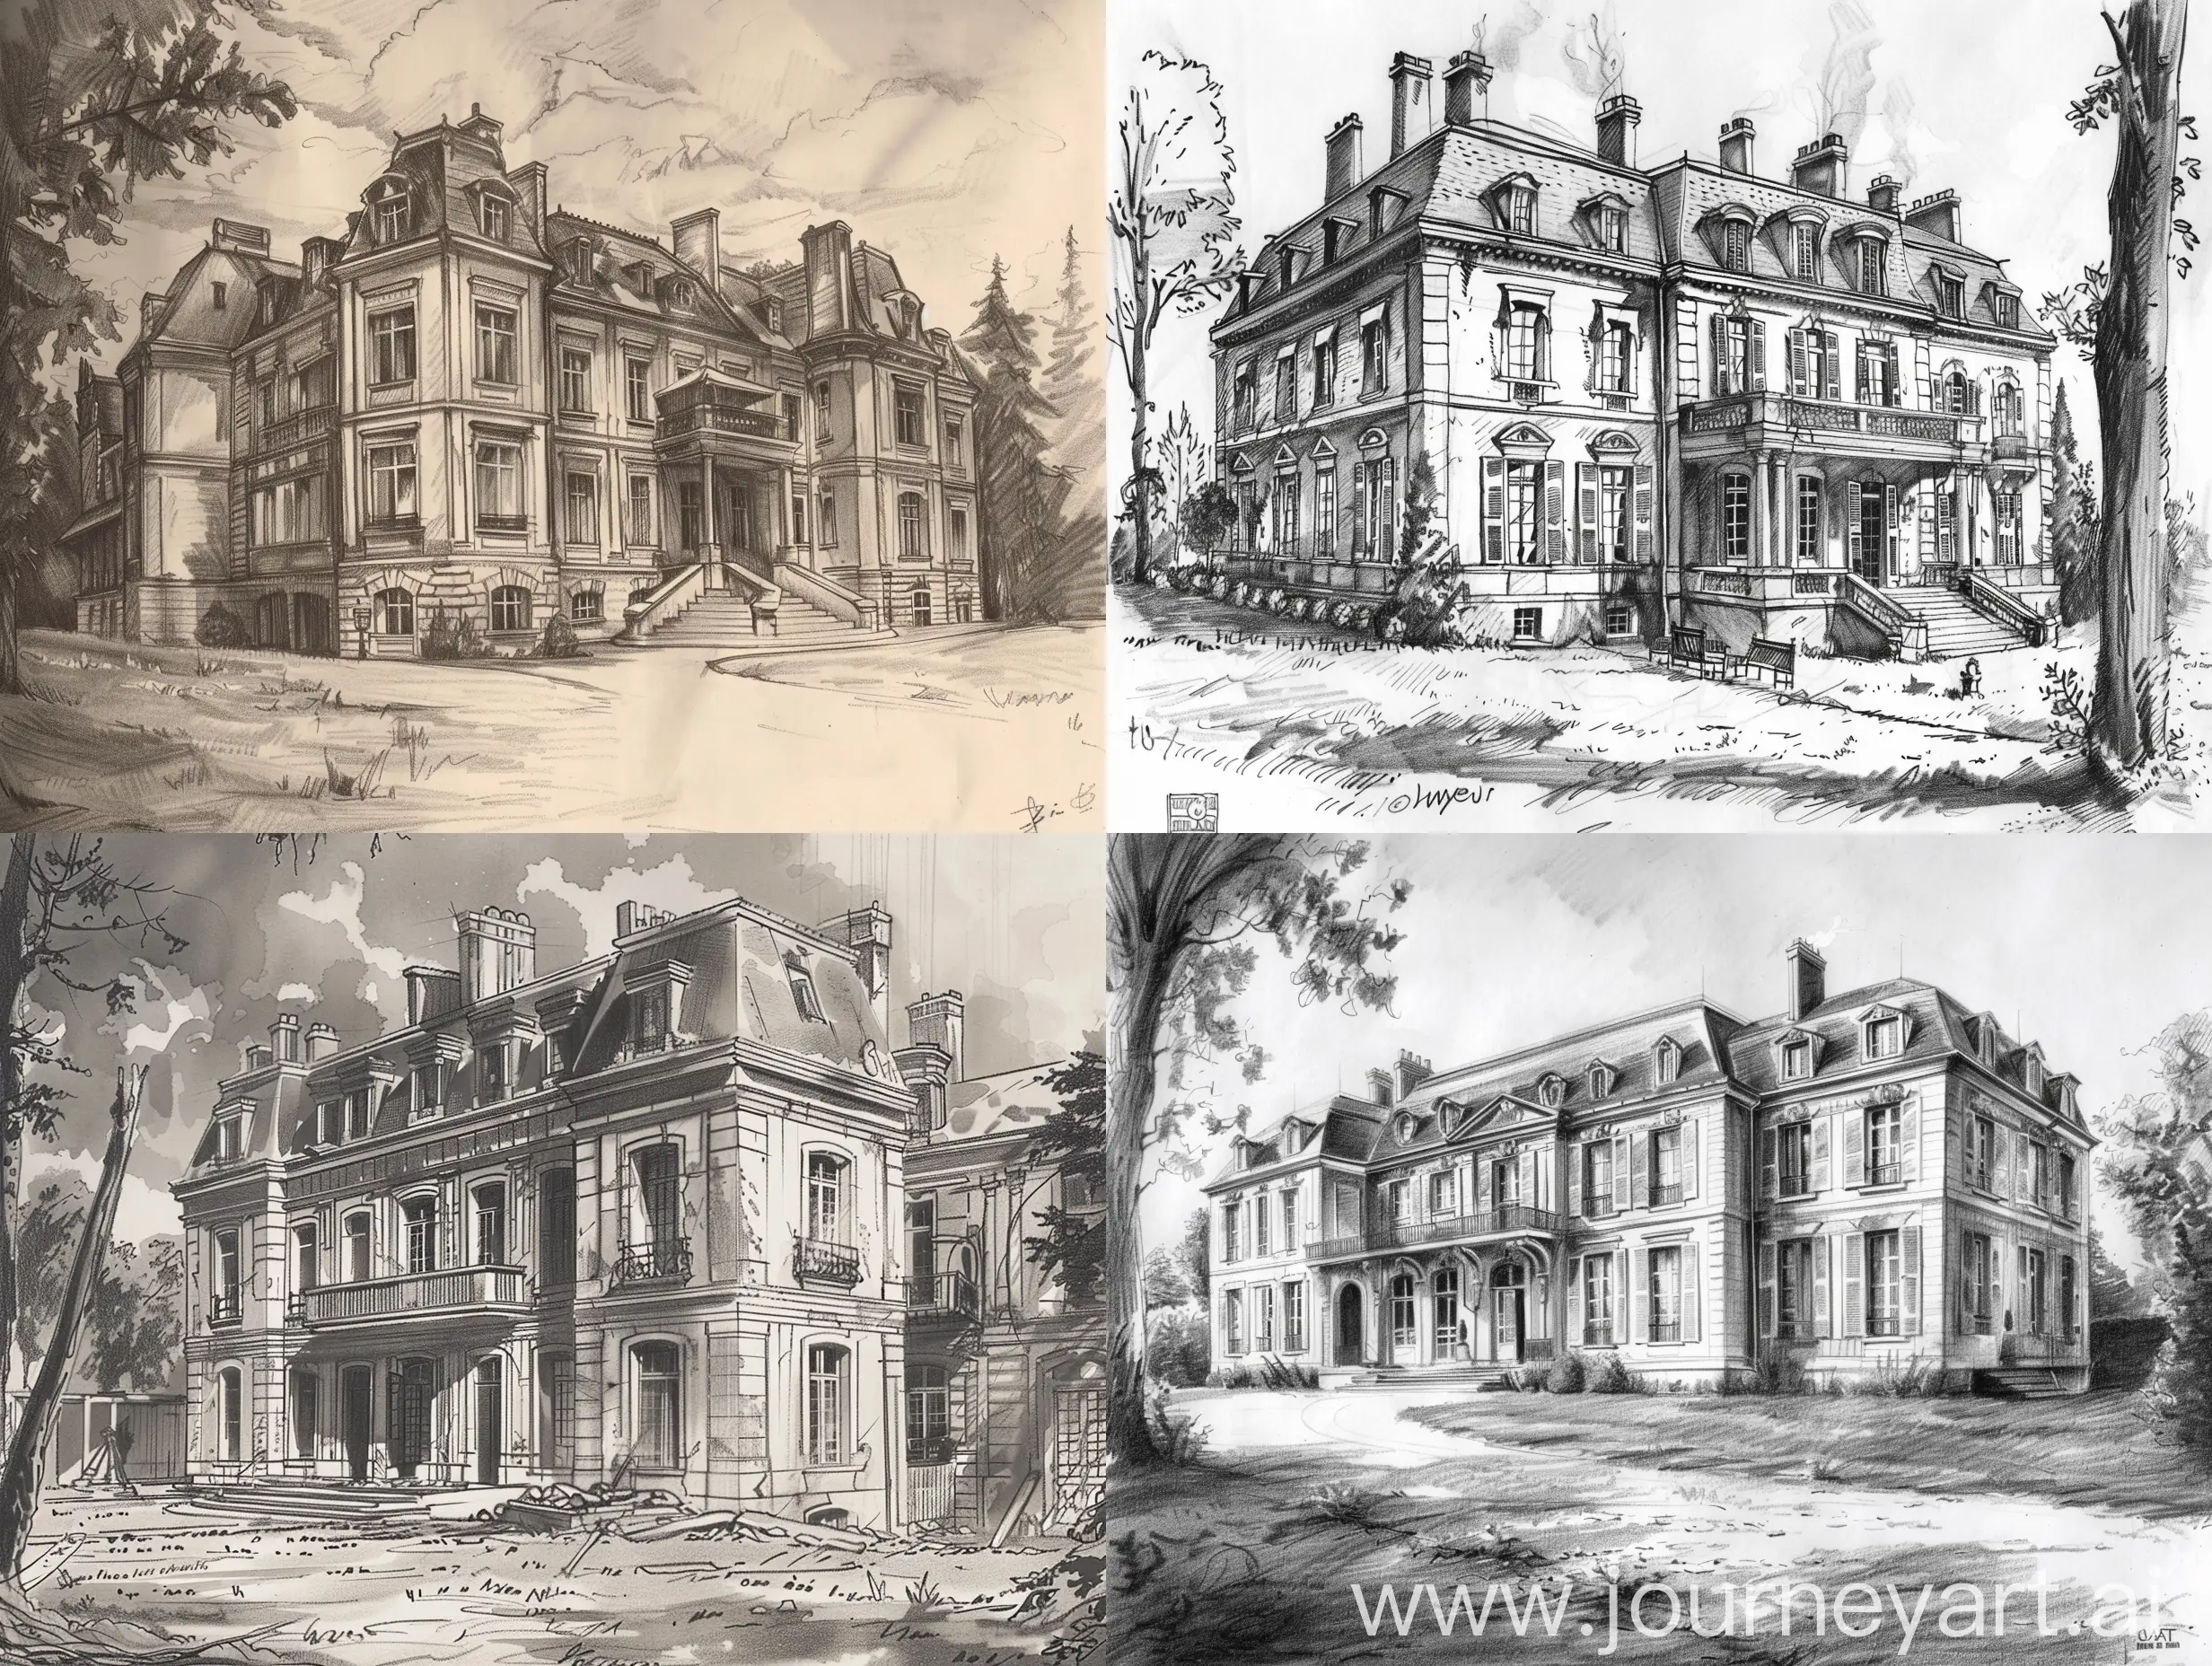 realistically draw a french mansion captured by the nazis during world war 2